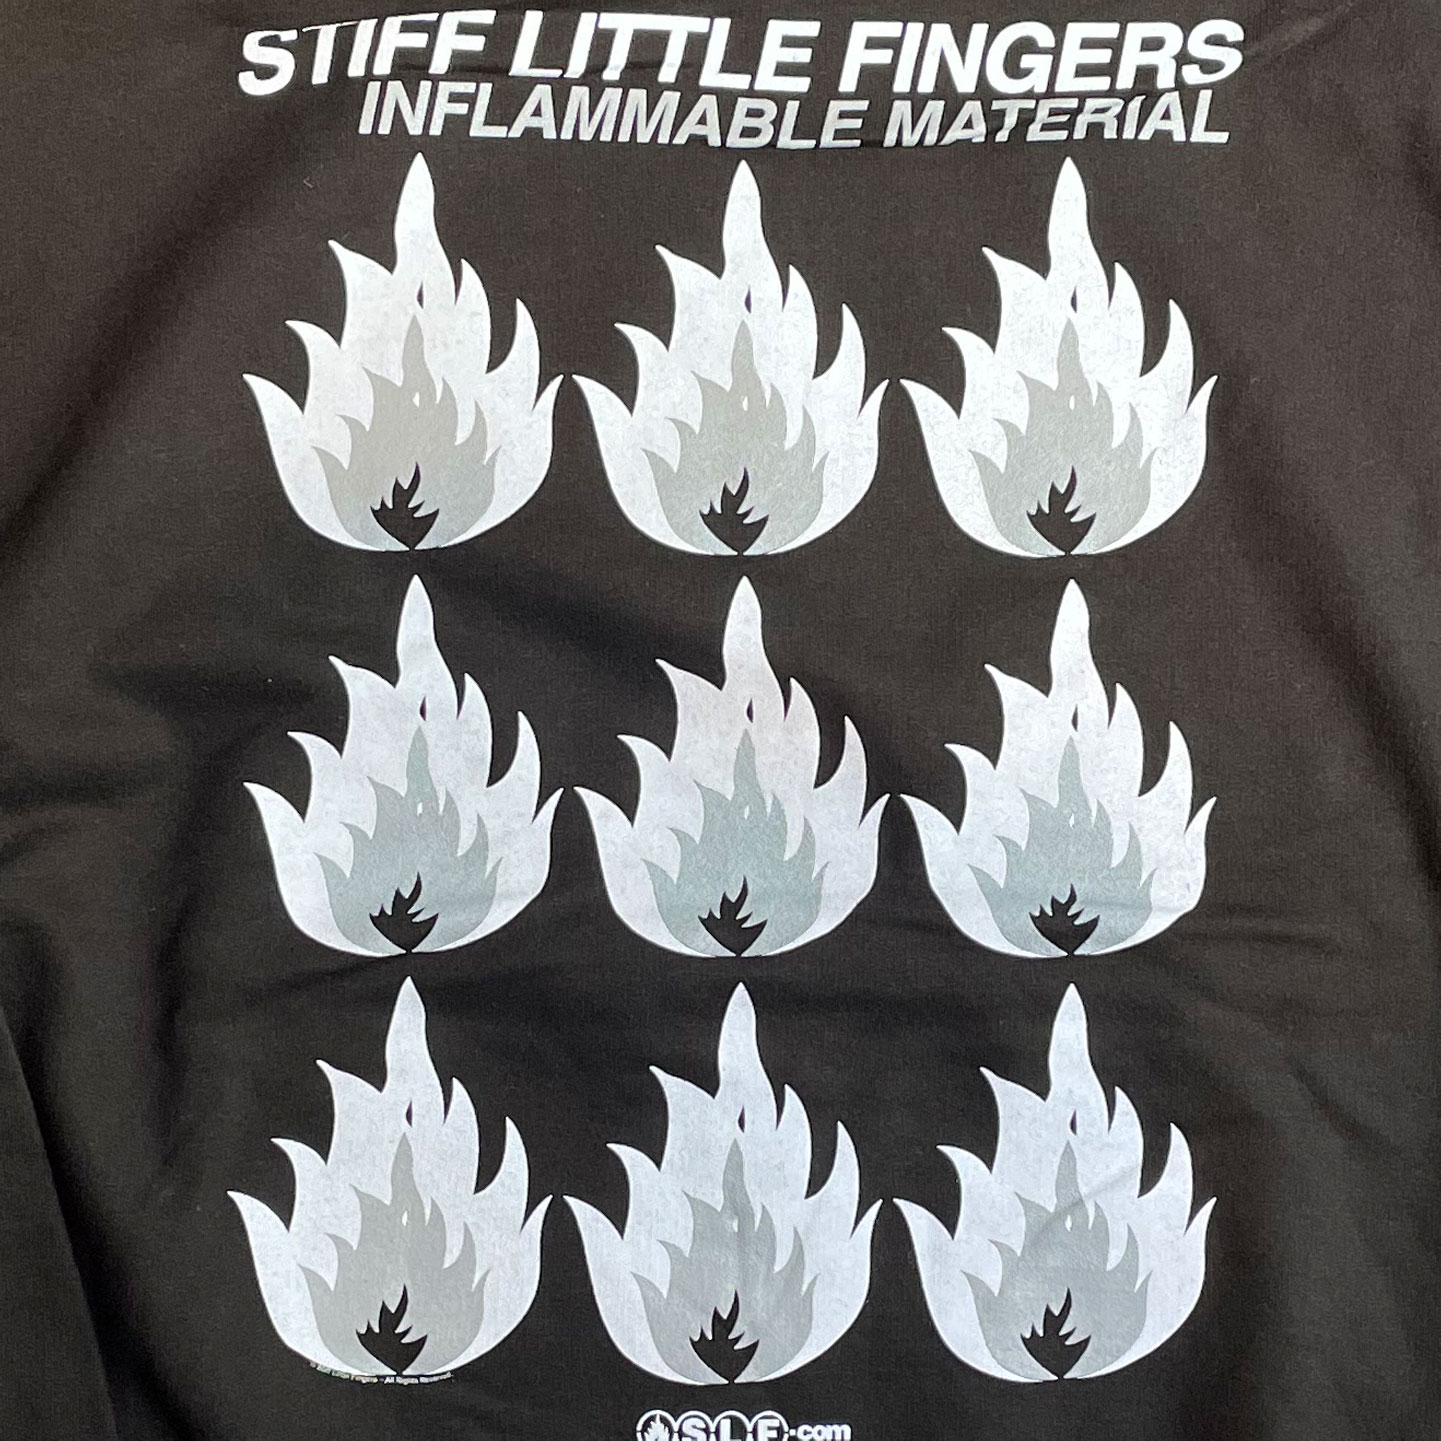 STIFF LITTLE FINGERS パーカー INFLAMMABLE MATERIAL OFFICIAL!!